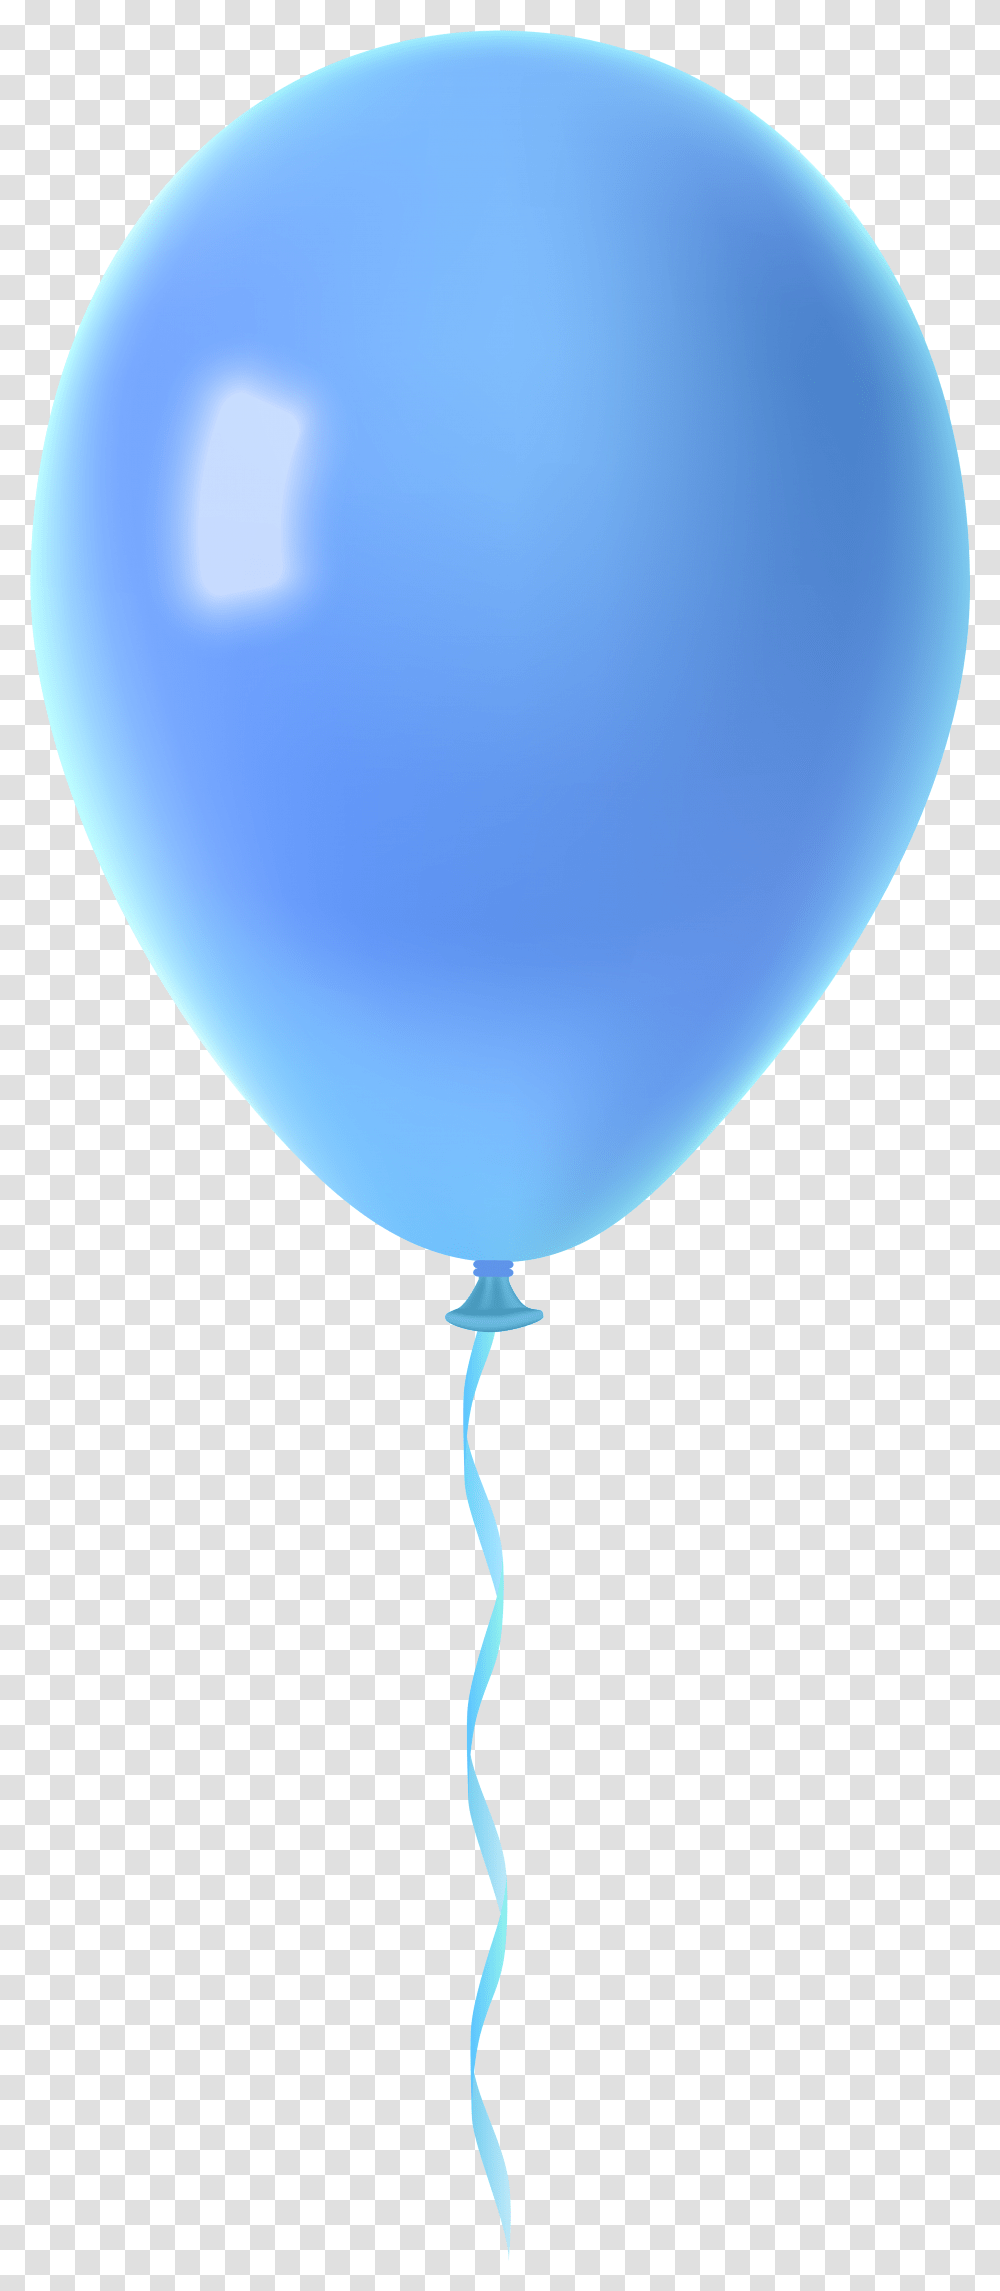 Party Ballons Image Blue Balloons Transparent Png